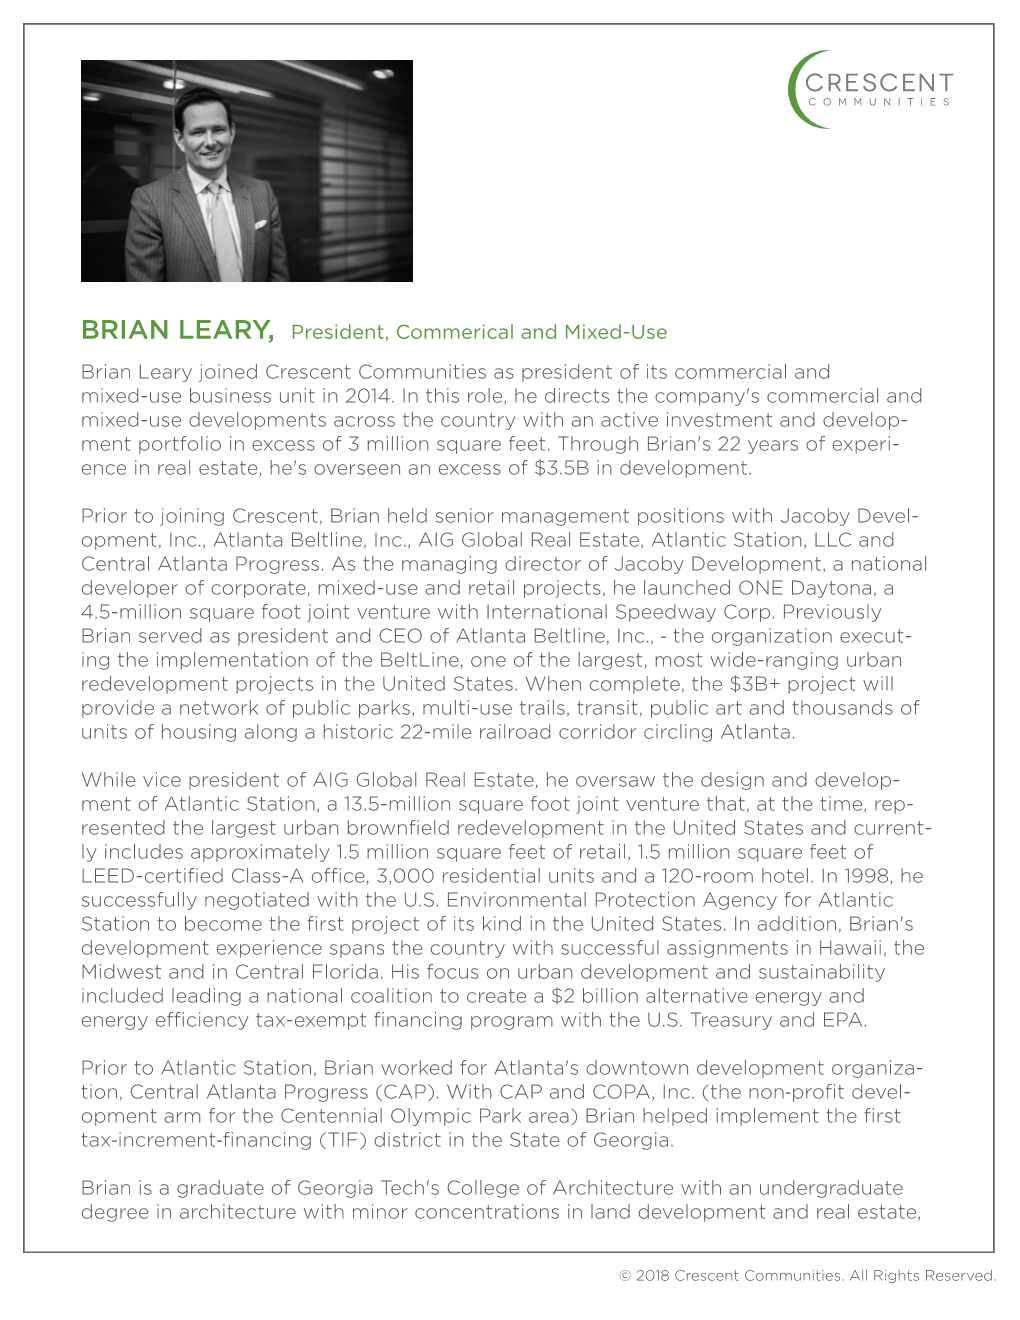 Brian Leary Joined Crescent Communities As President of Its Commercial and Mixed-Use Business Unit in 2014